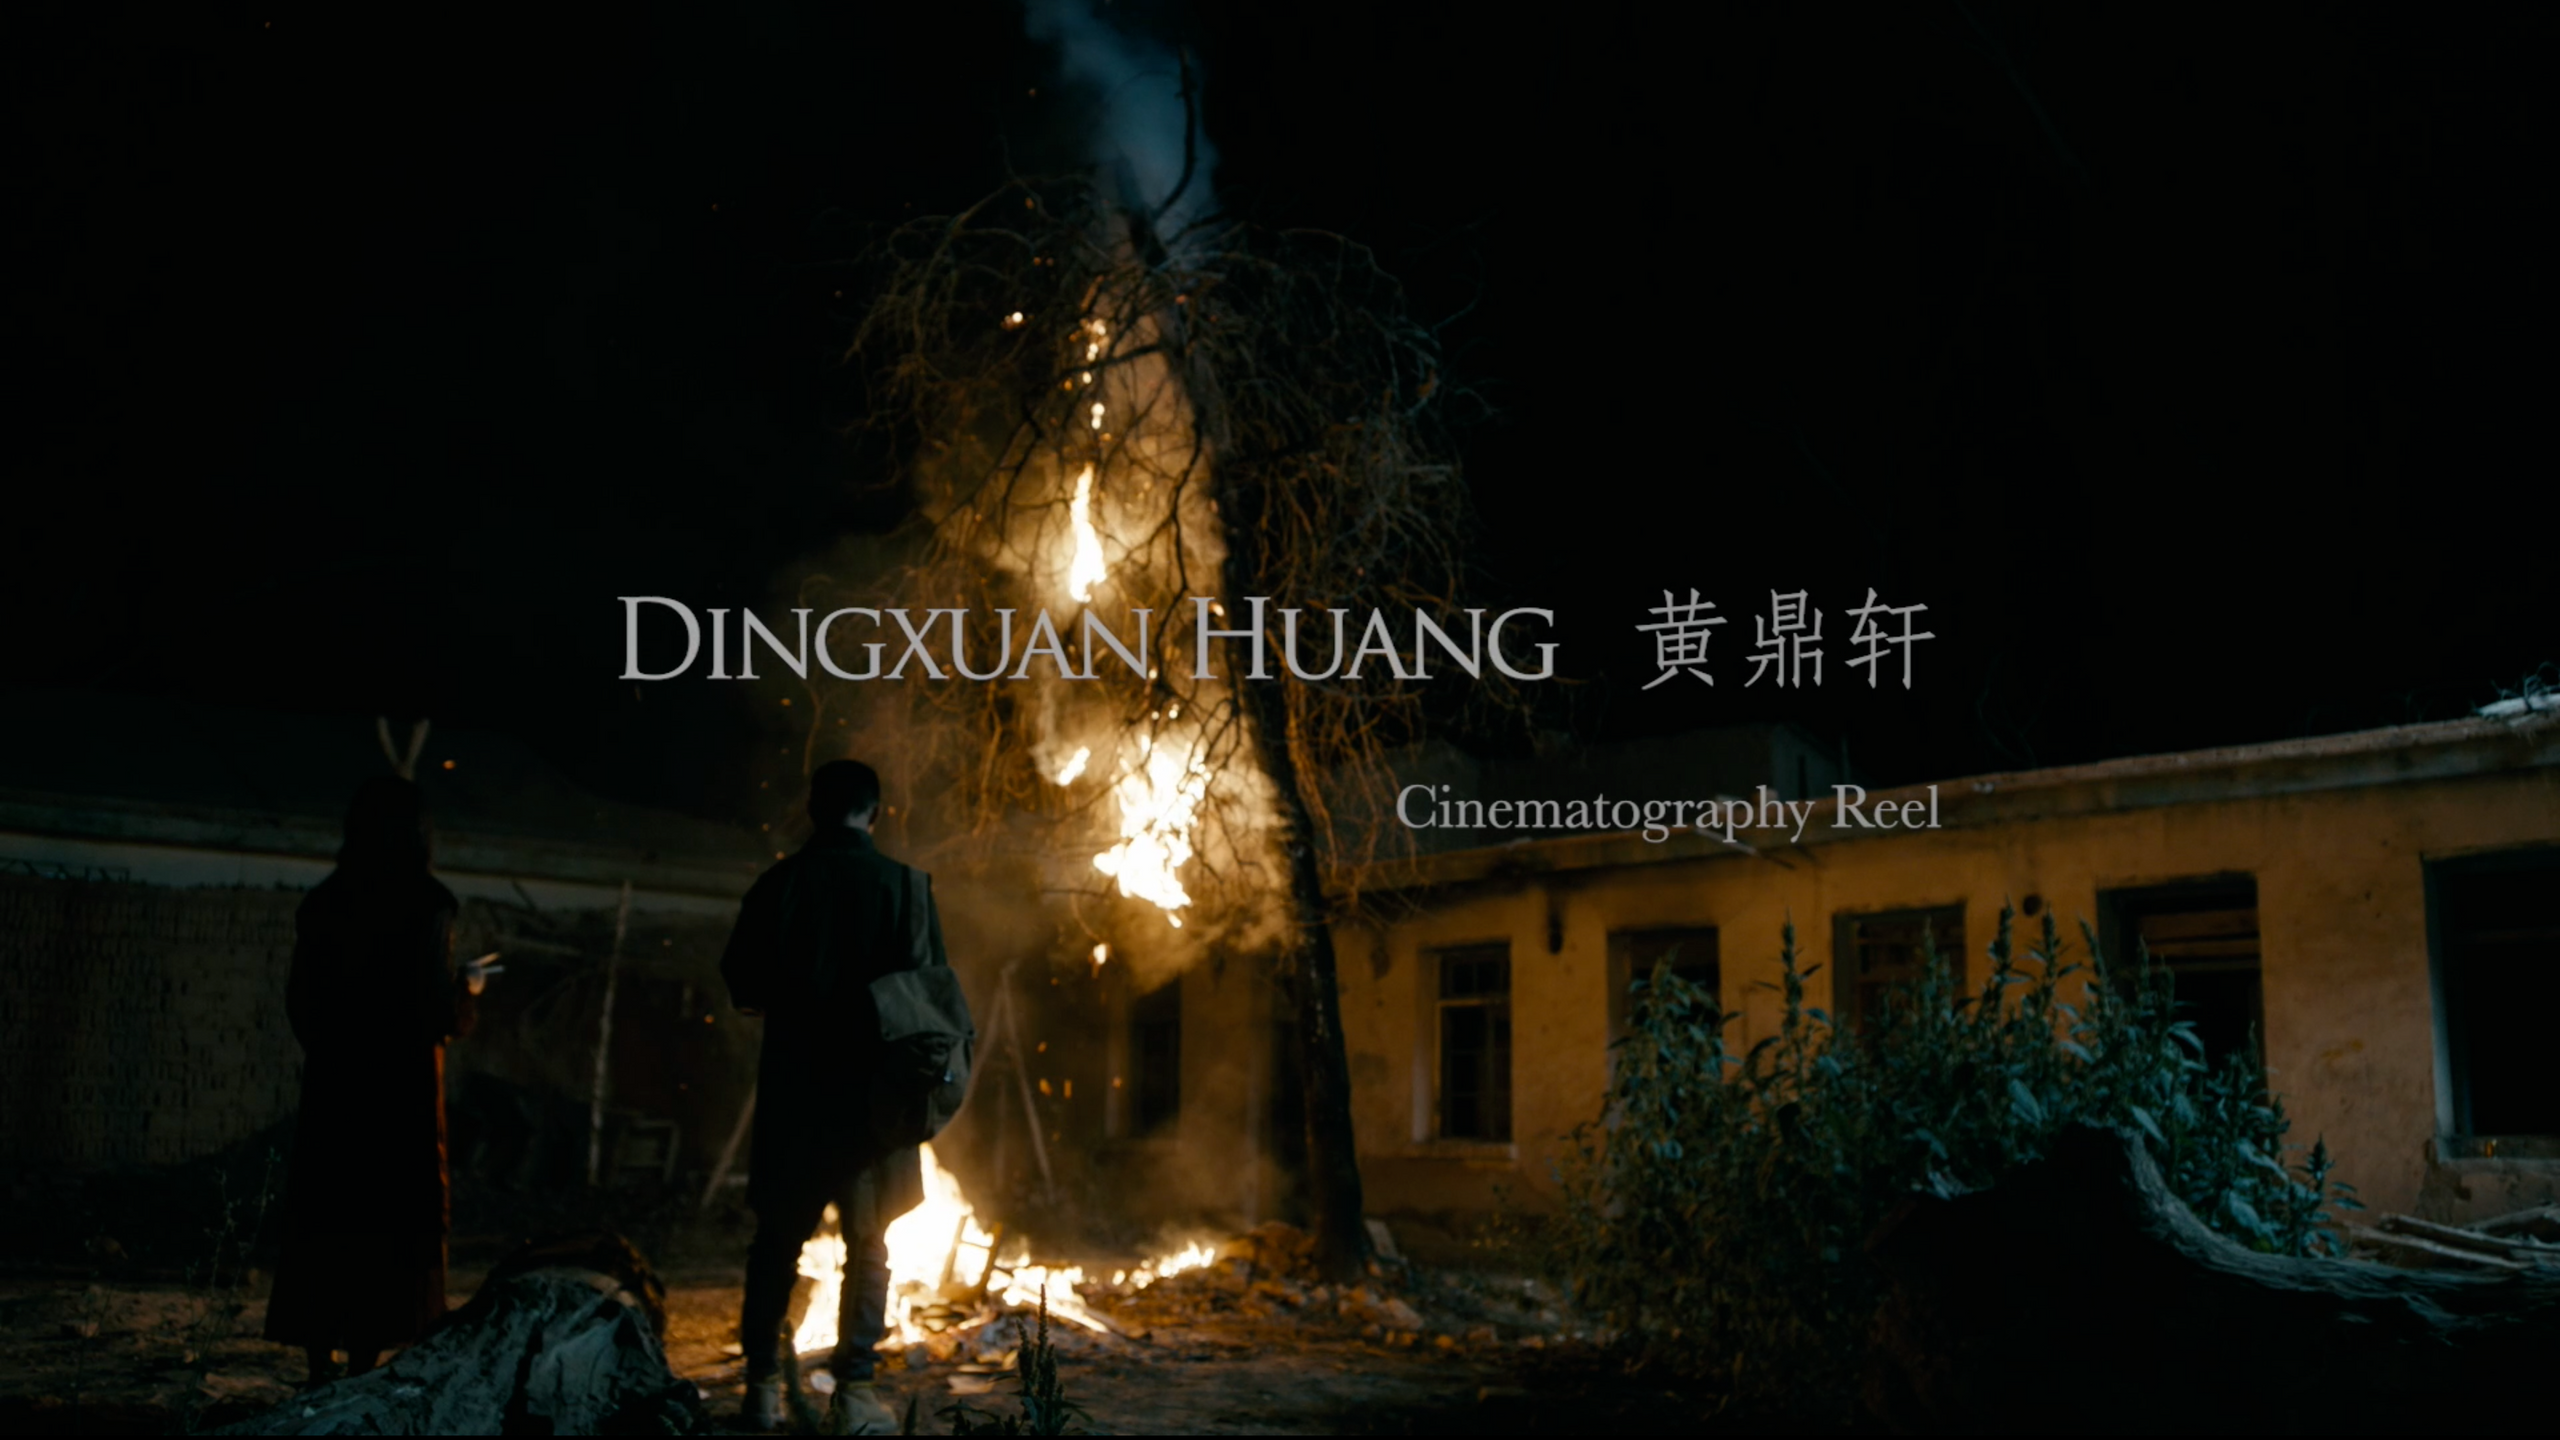 DingxuanHuang 2019 Cine Reel